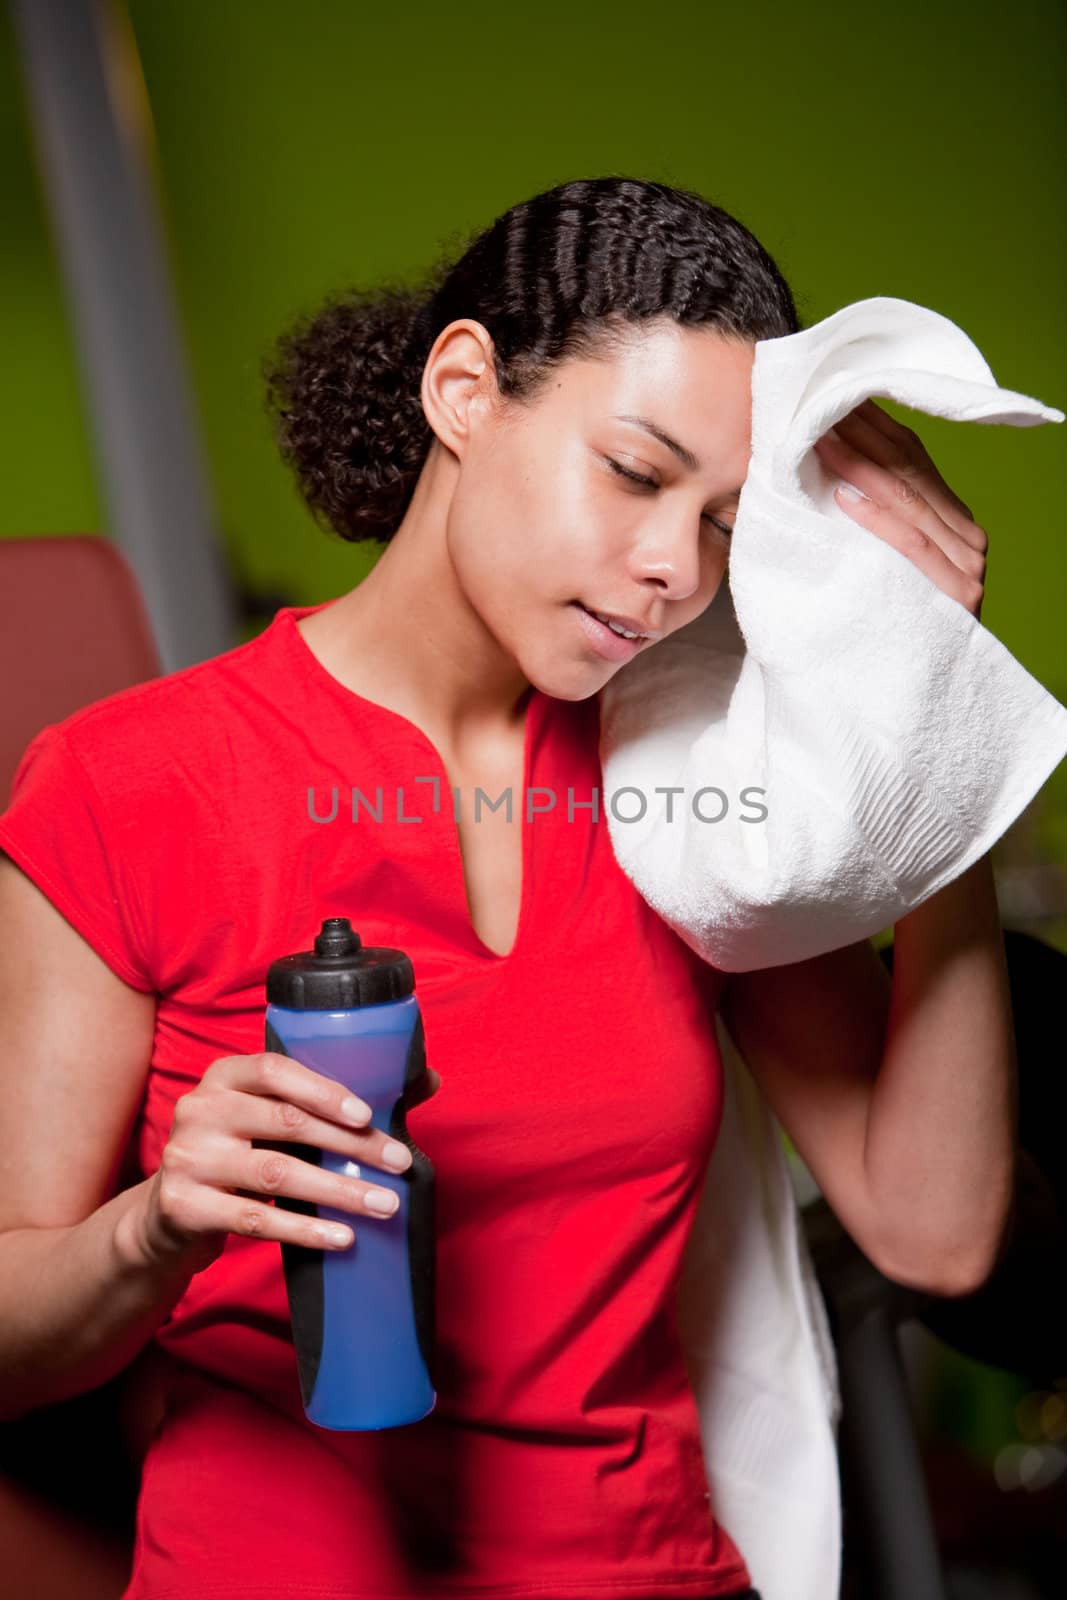 Attractive young girl in the gym wiping away the sweat